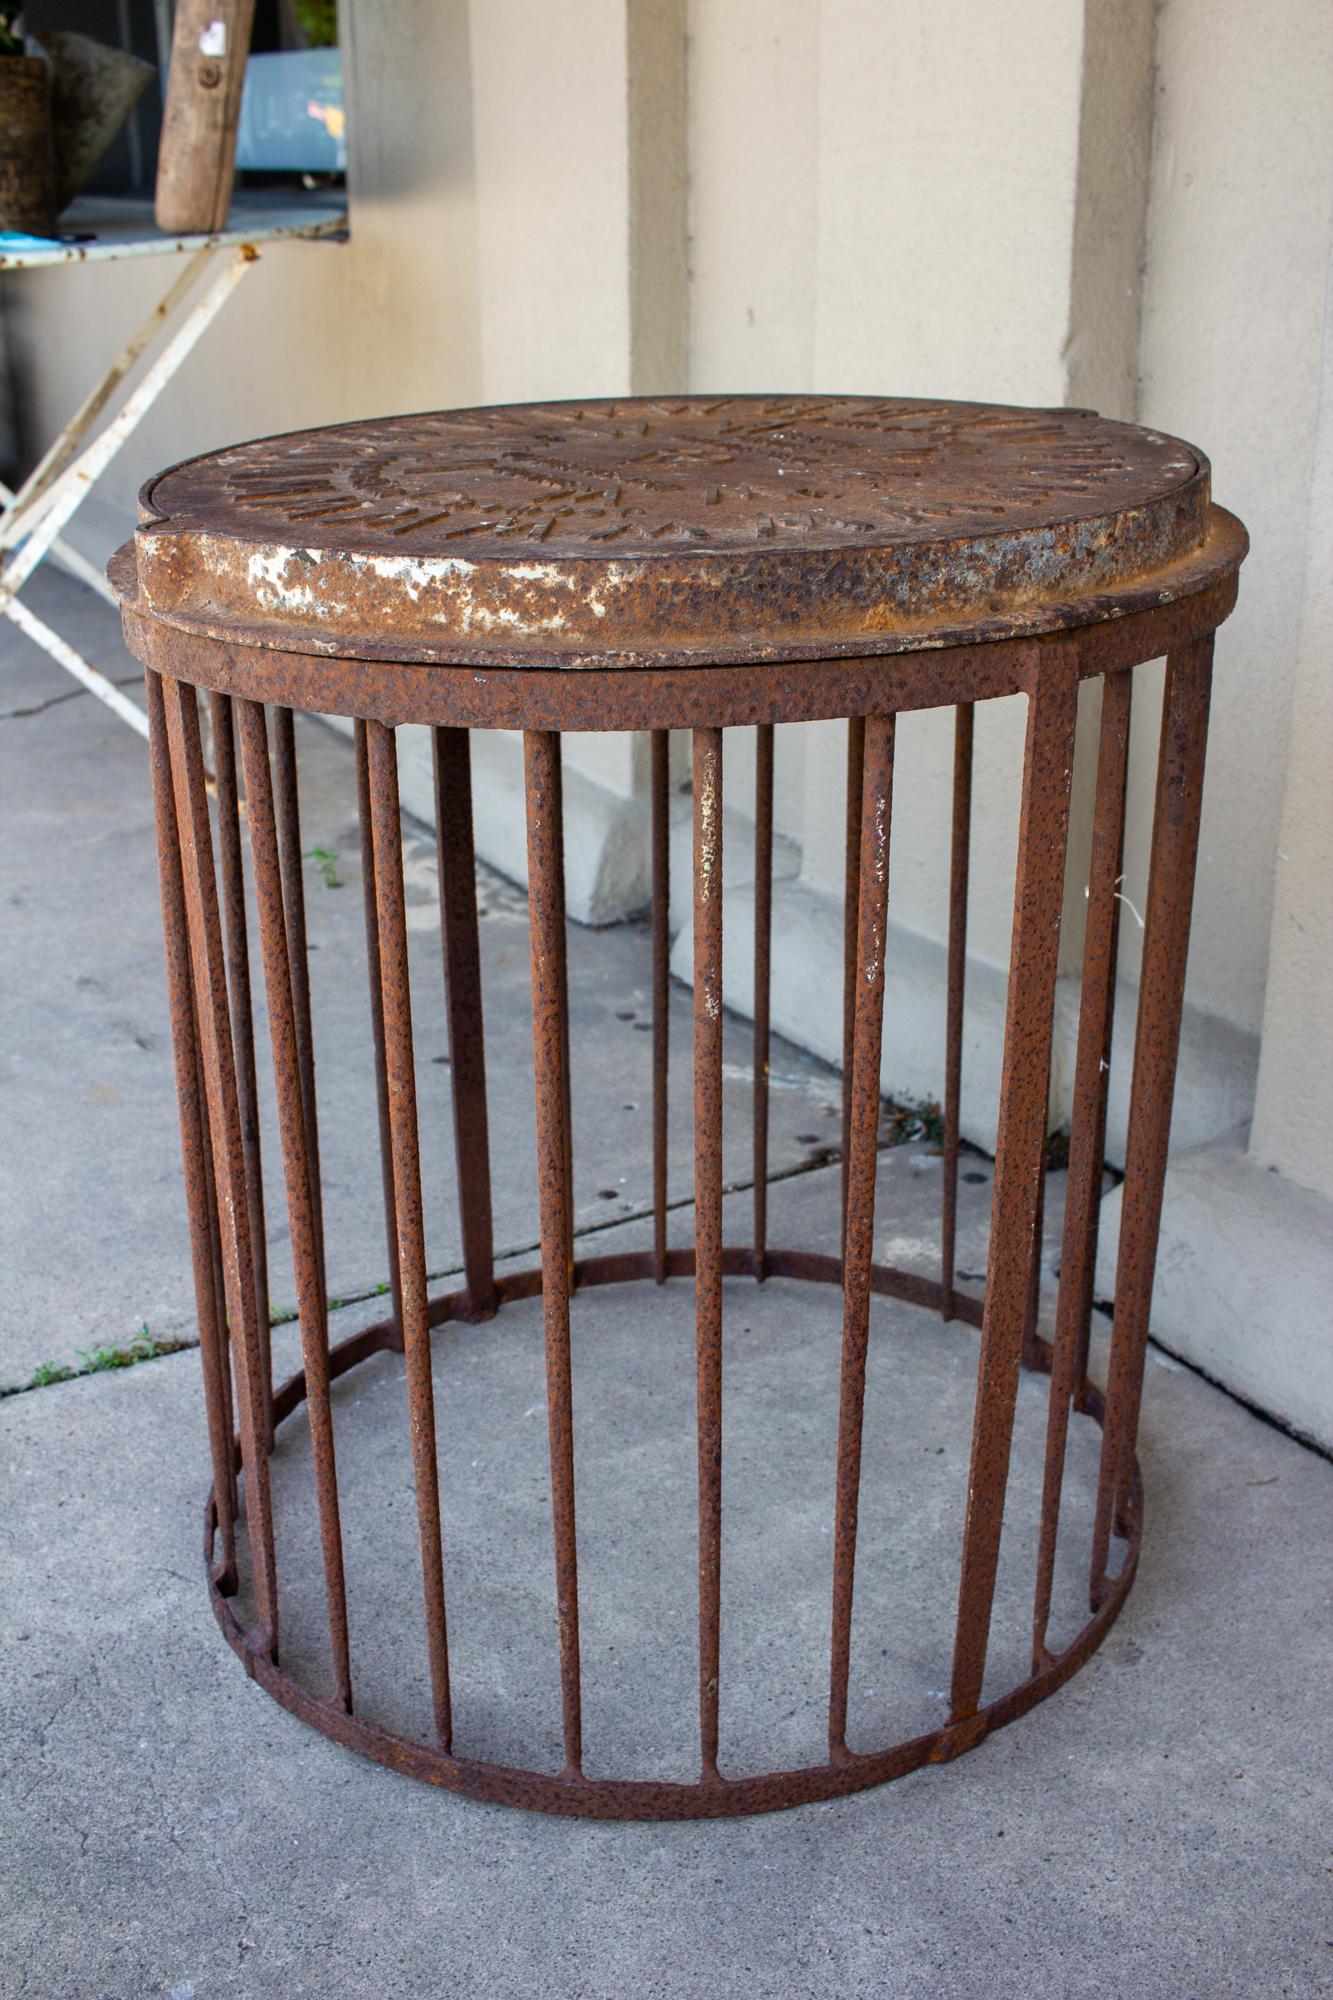 English Industrial Antique British Iron Manhole Cover and Drain Side Table